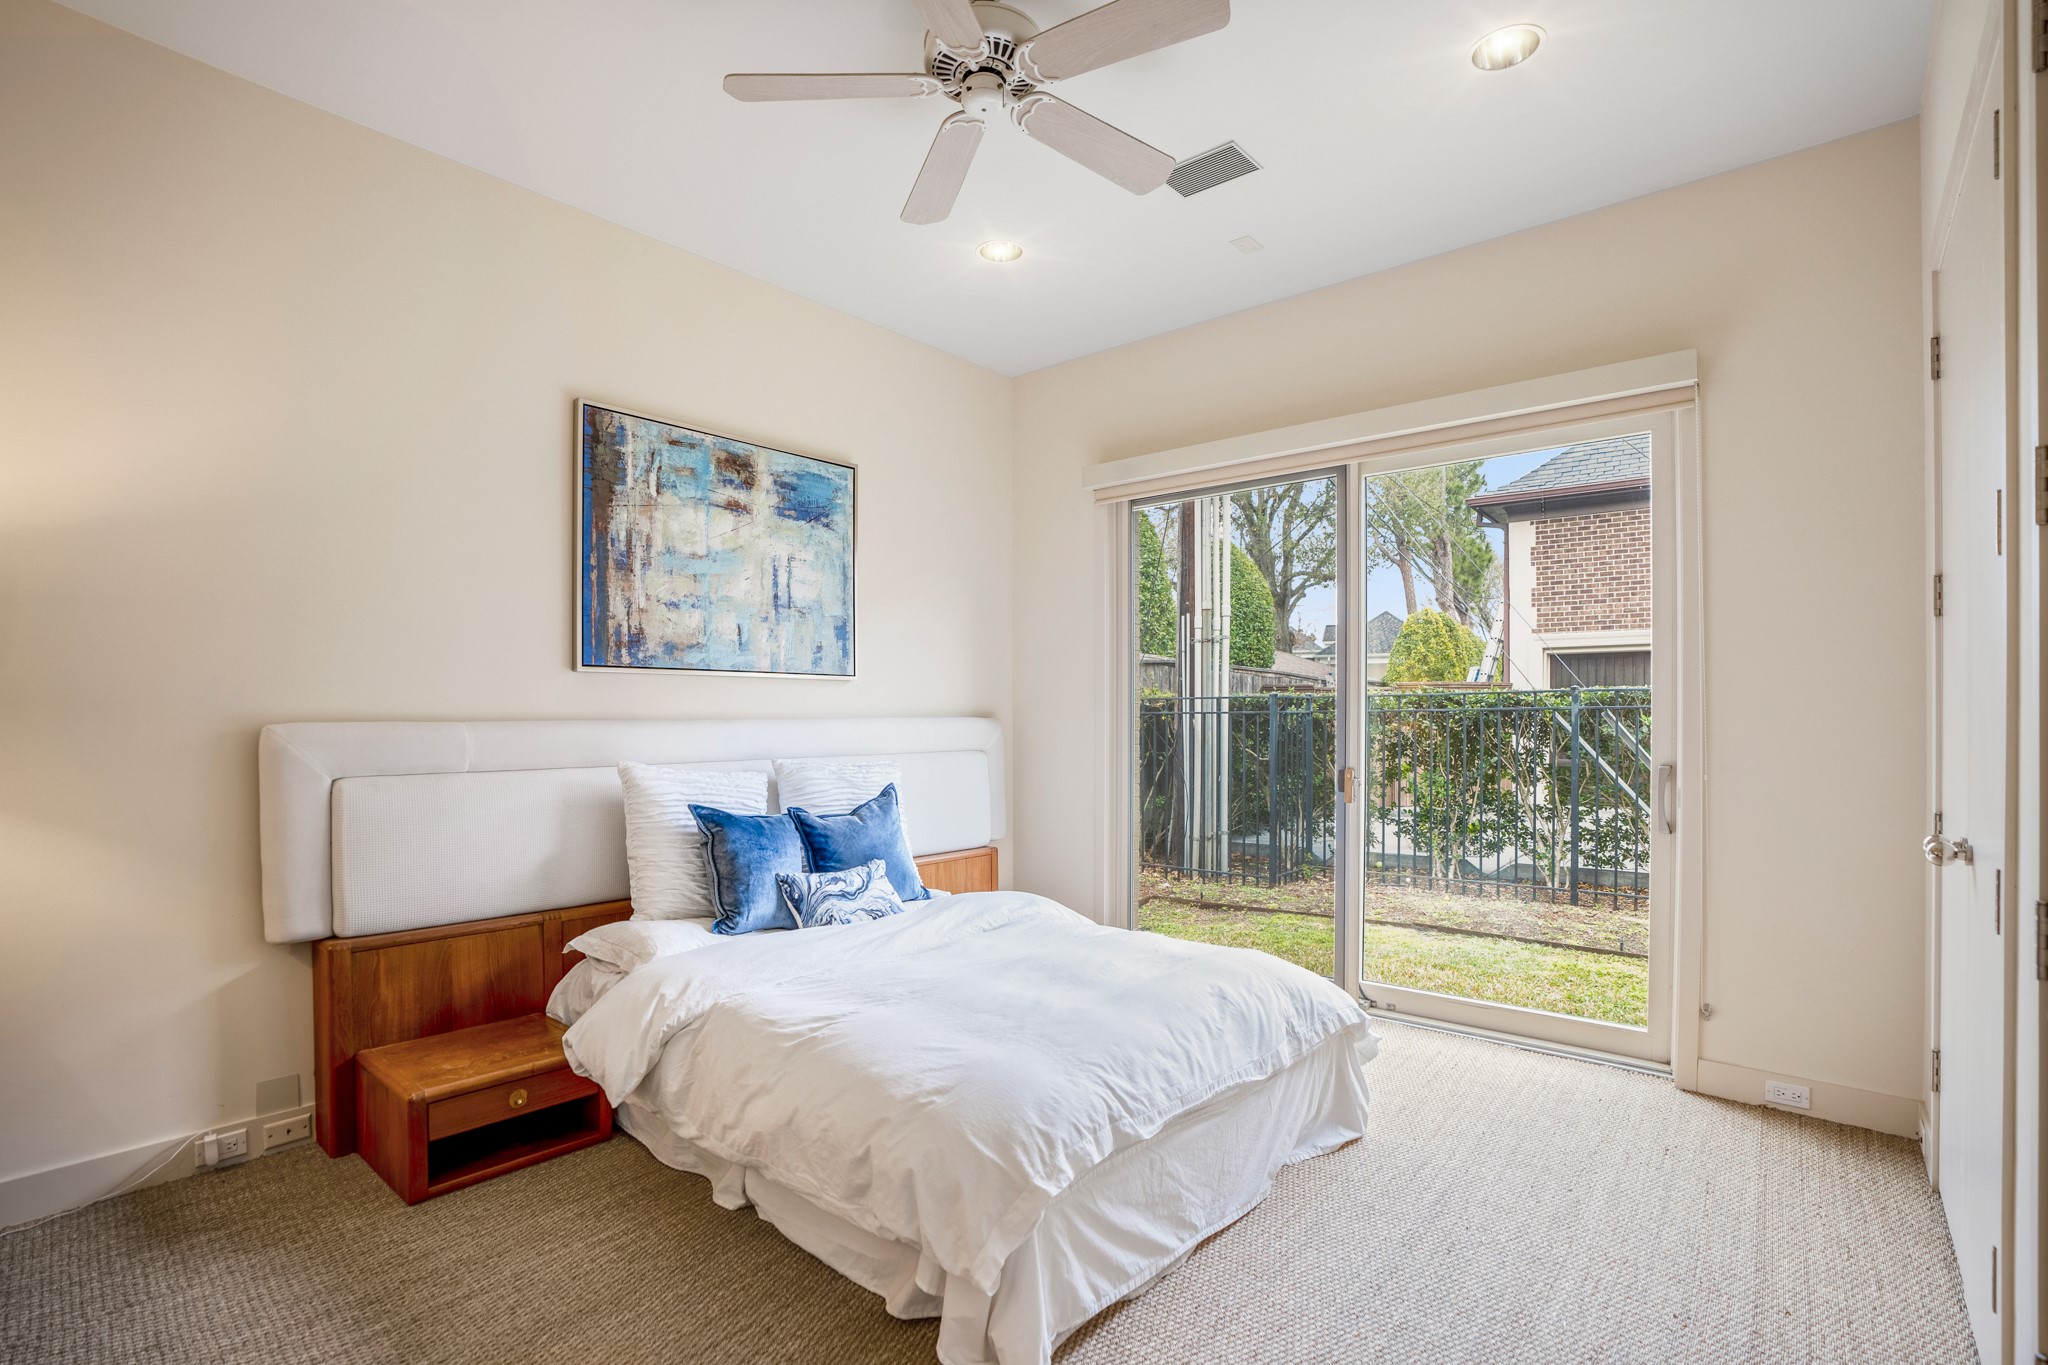 A first-floor bedroom with en-suite bathroom. Sliding glass doors lead you to the side yard.